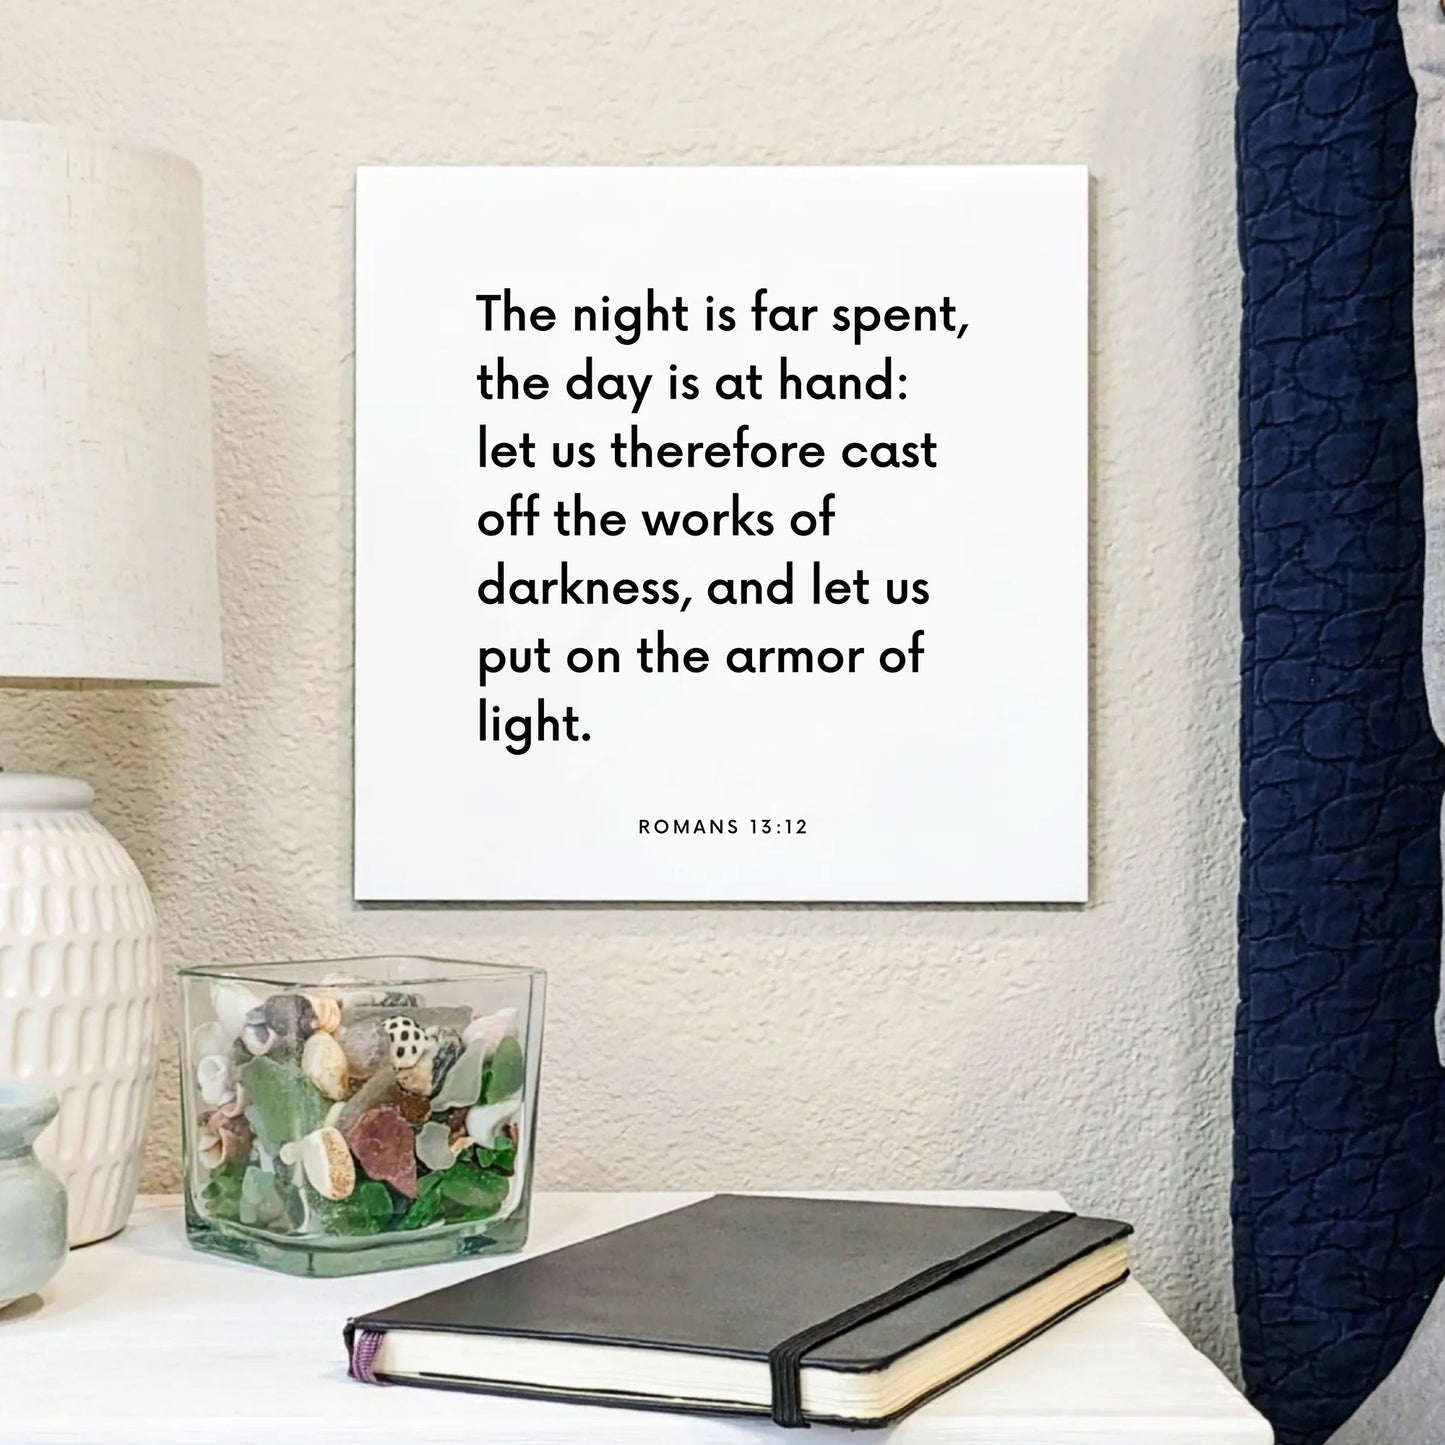 Bedside mouting of the scripture tile for Romans 13:12 - "Cast off the works of darkness and put on the armor of light"